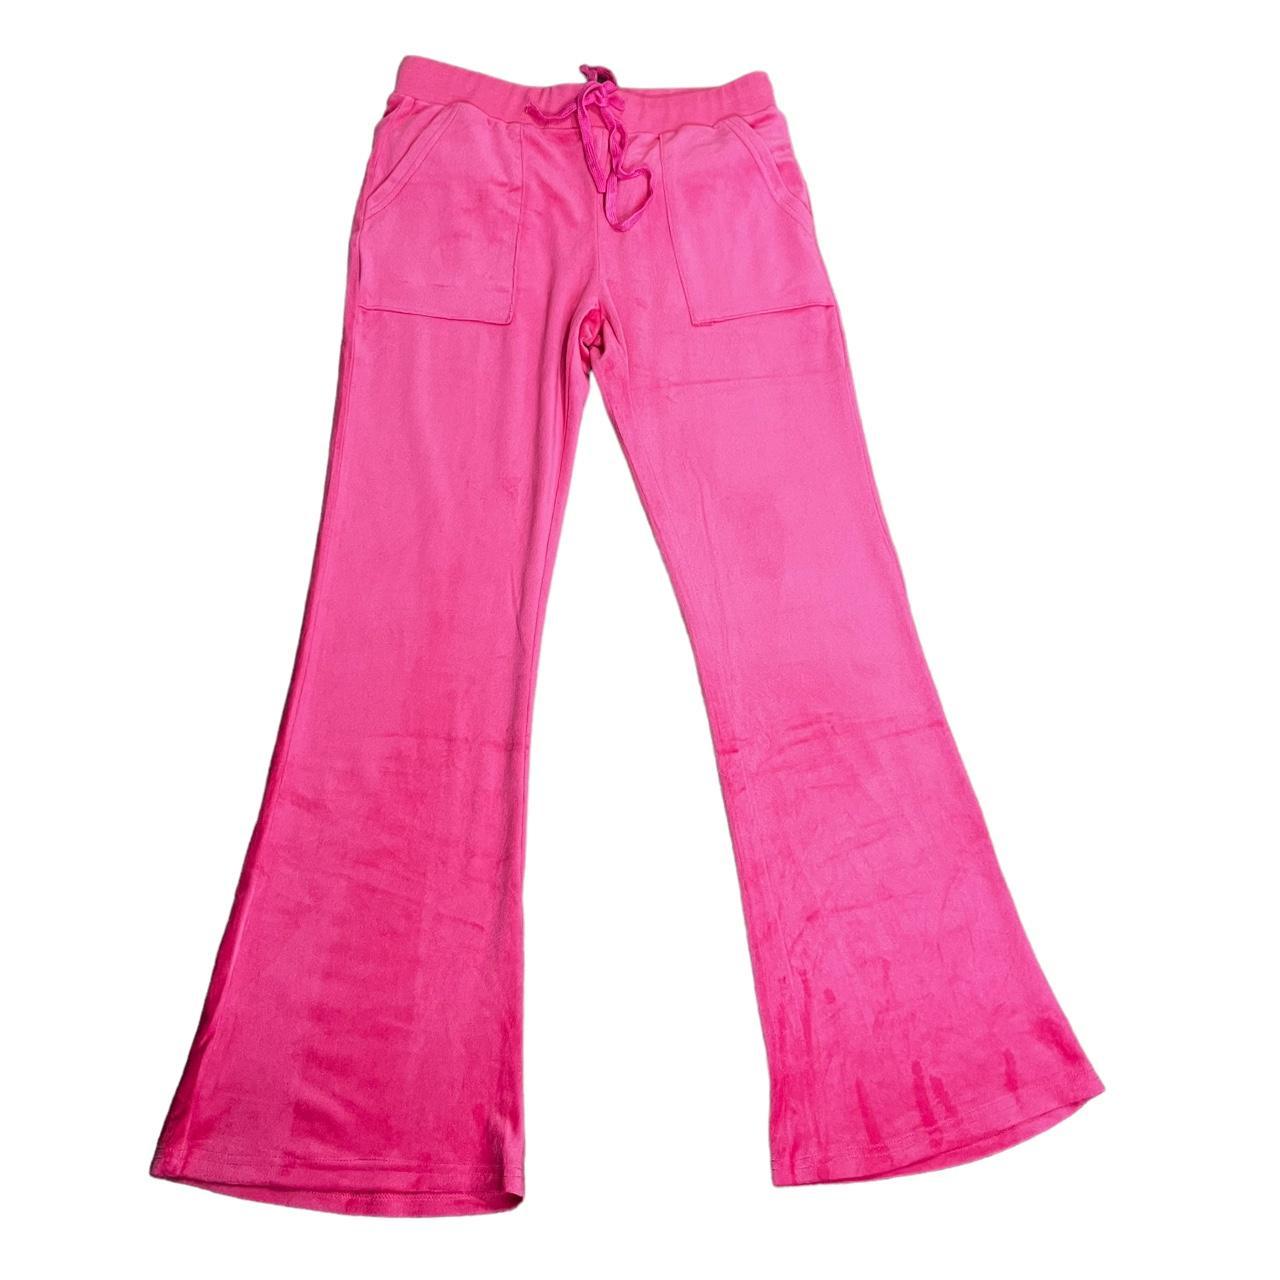 Juicy Couture Women's Joggers-tracksuits